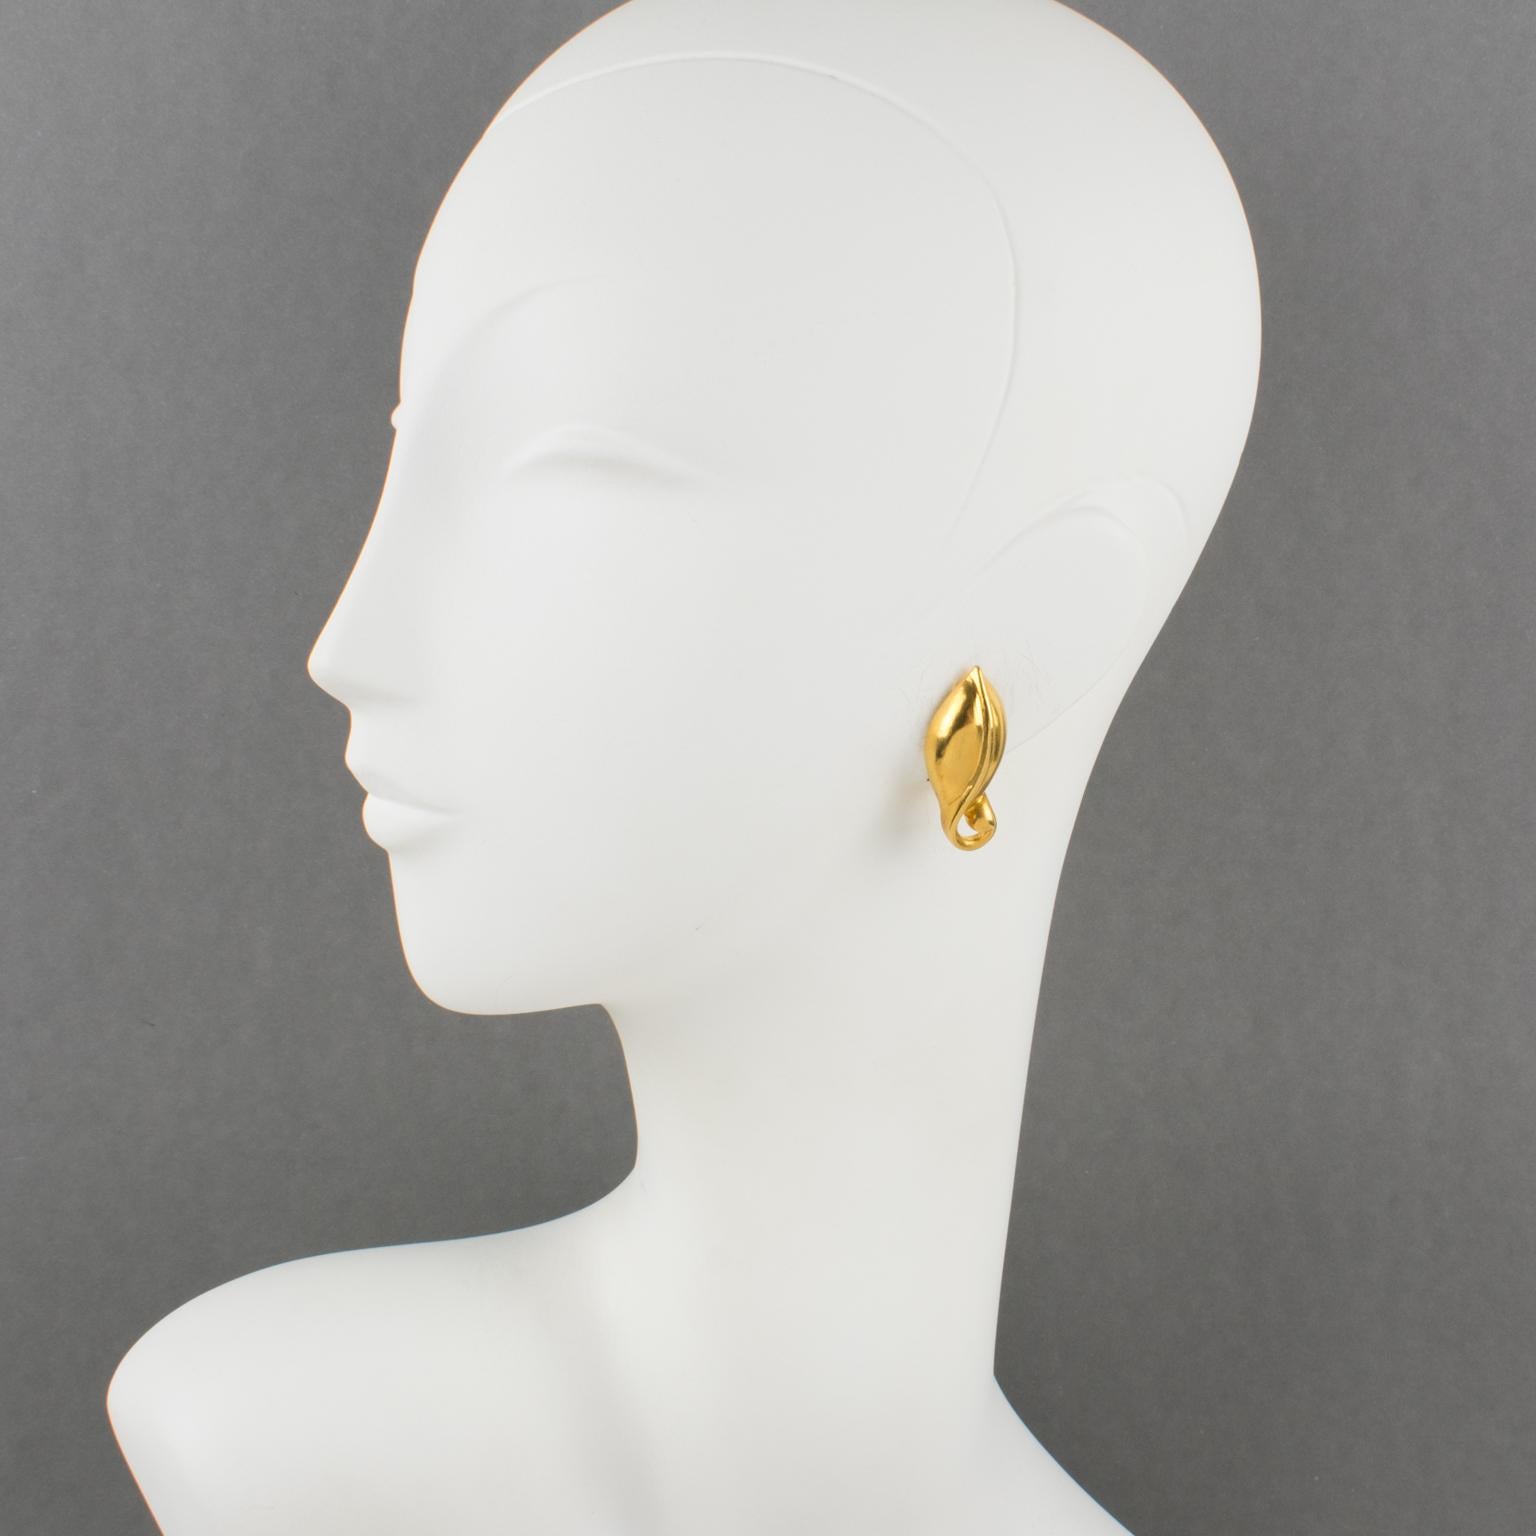 Ted Lapidus Paris designed these charming clip-on earrings. The pieces boast a dimensional shiny satin gilt metal volute. They are marked underside: Ted Lapidus - Paris.
Measurements: 0.63 in wide (1.5 cm) x 1.38 in high (3.5 cm).